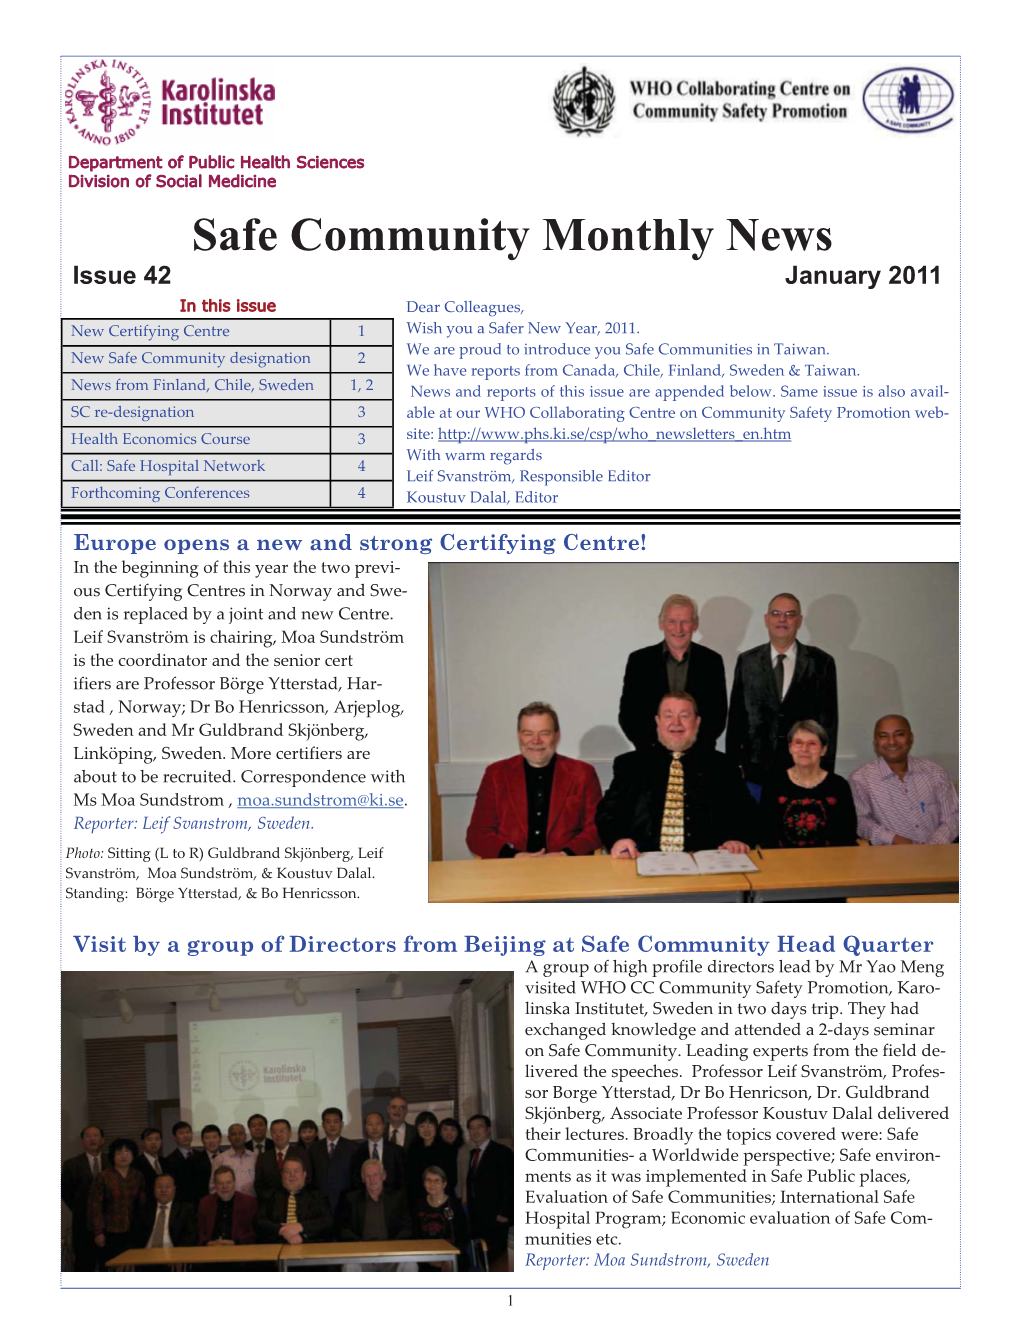 Safe Community Monthly News Issue 42 January 2011